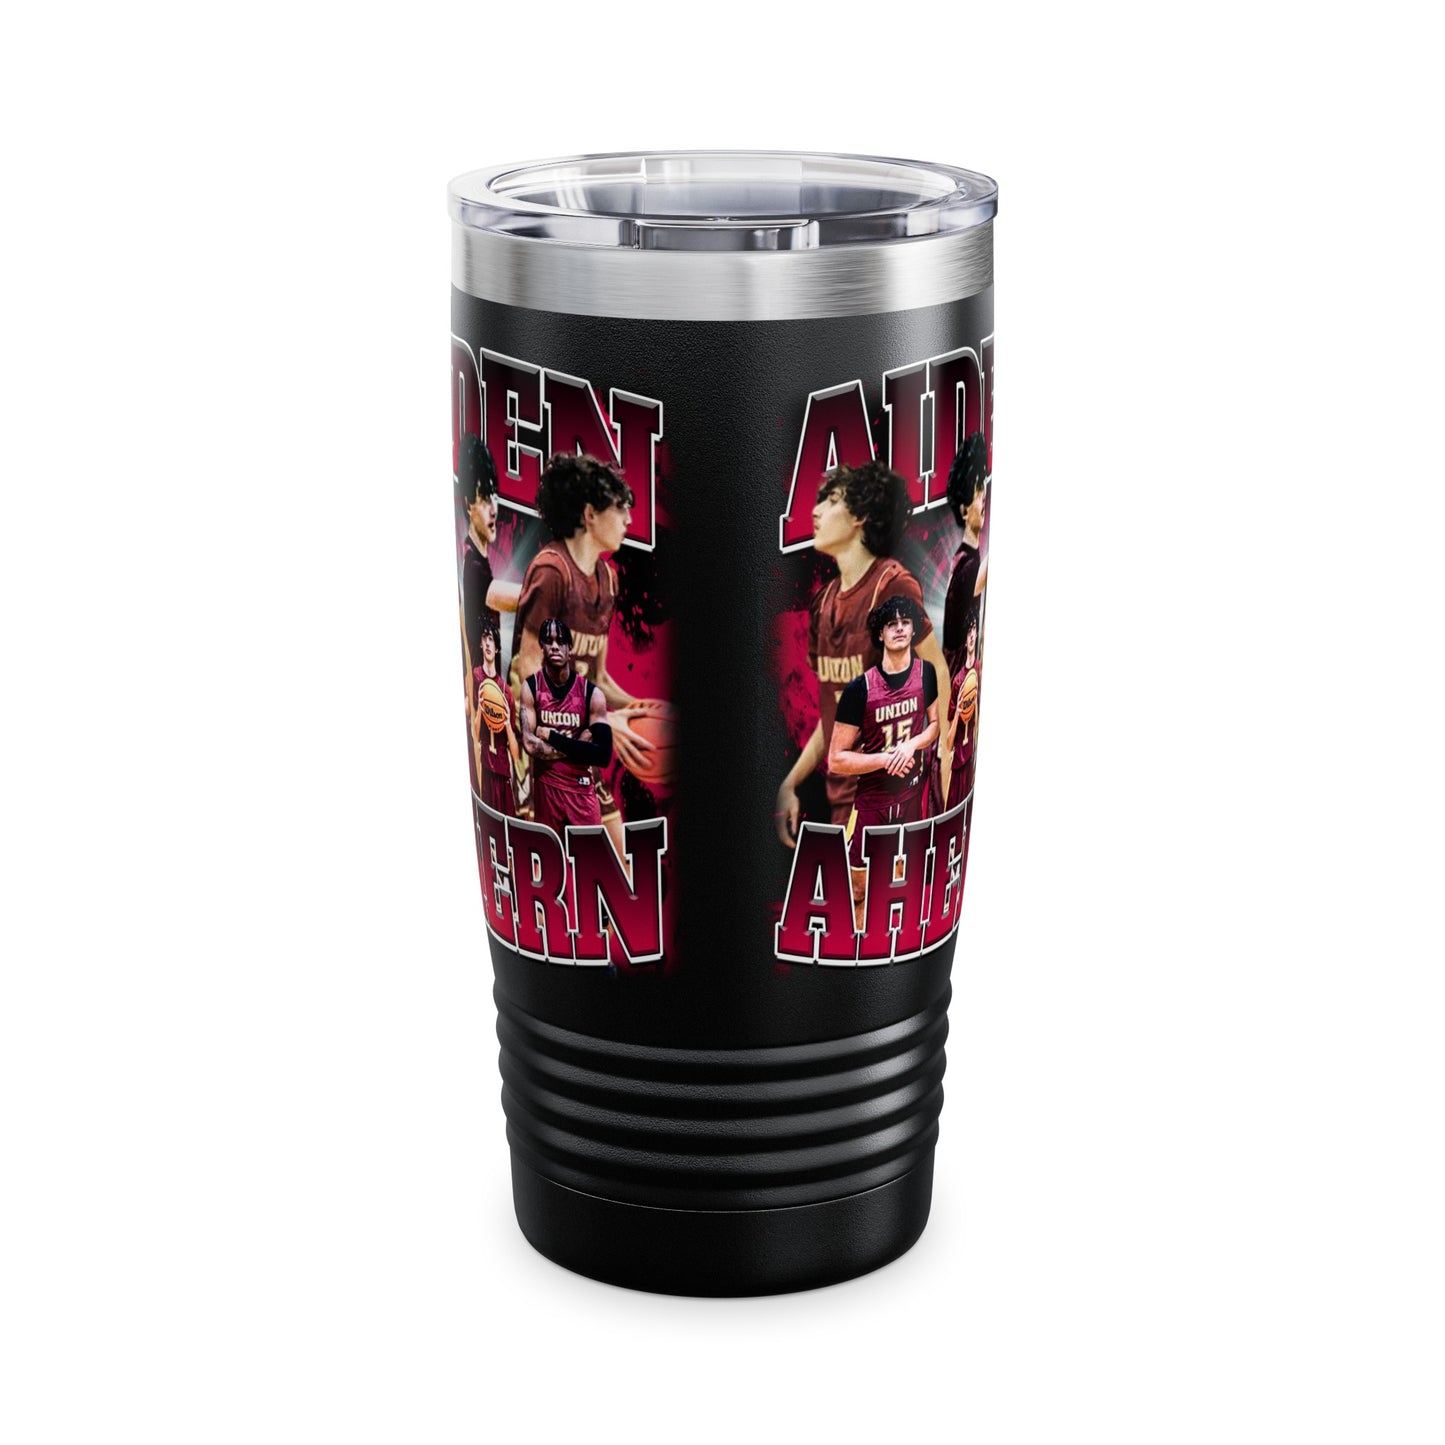 Aiden Ahern Stainless Steal Tumbler